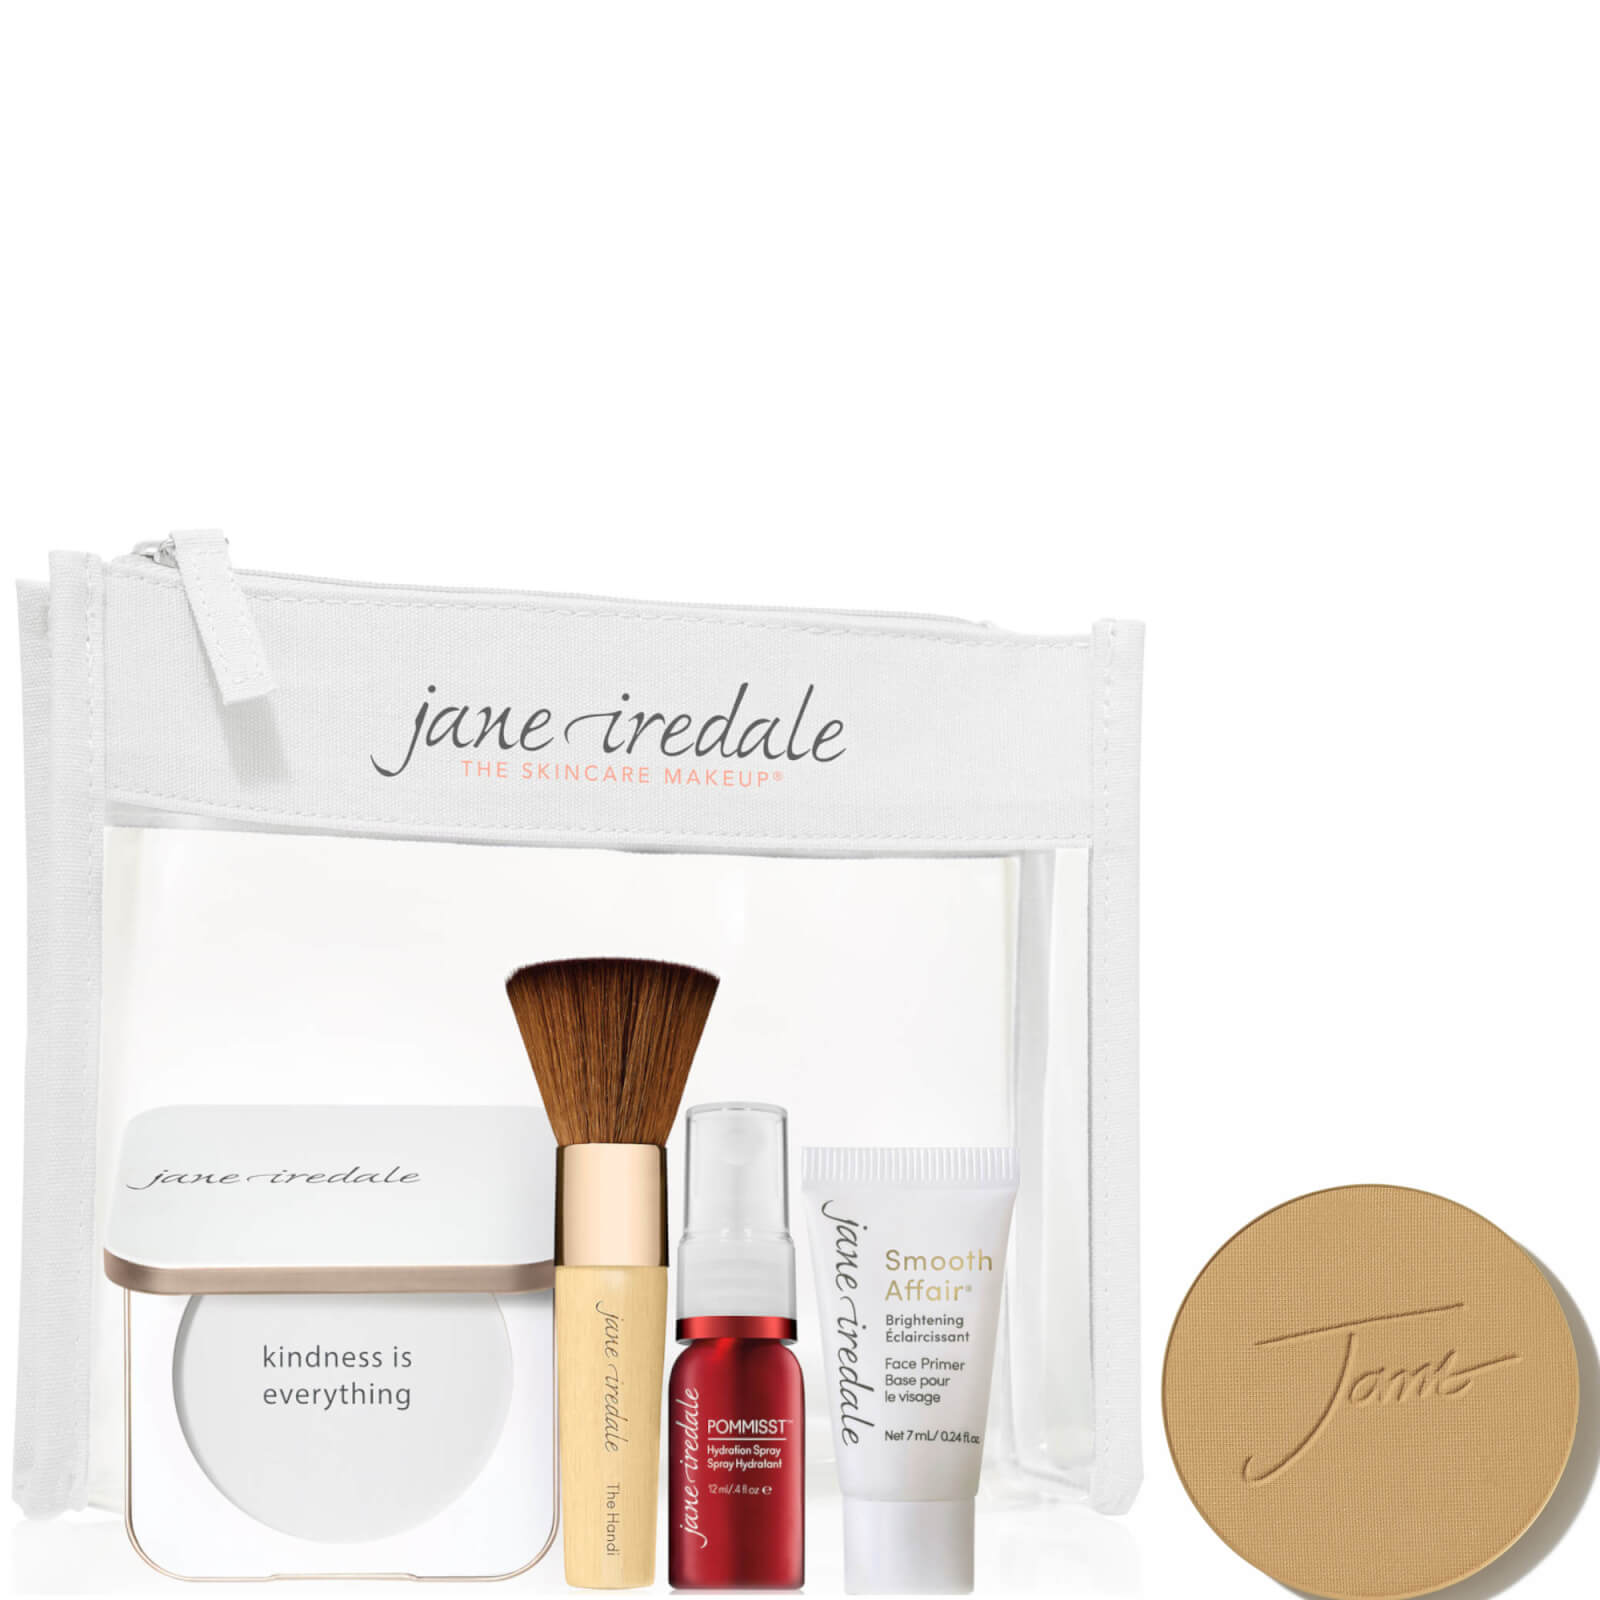 Jane Iredale The Skincare Makeup System Essentials And Purepressed Mineral Foundation Bundle (various Shades) (wo In Golden Tan